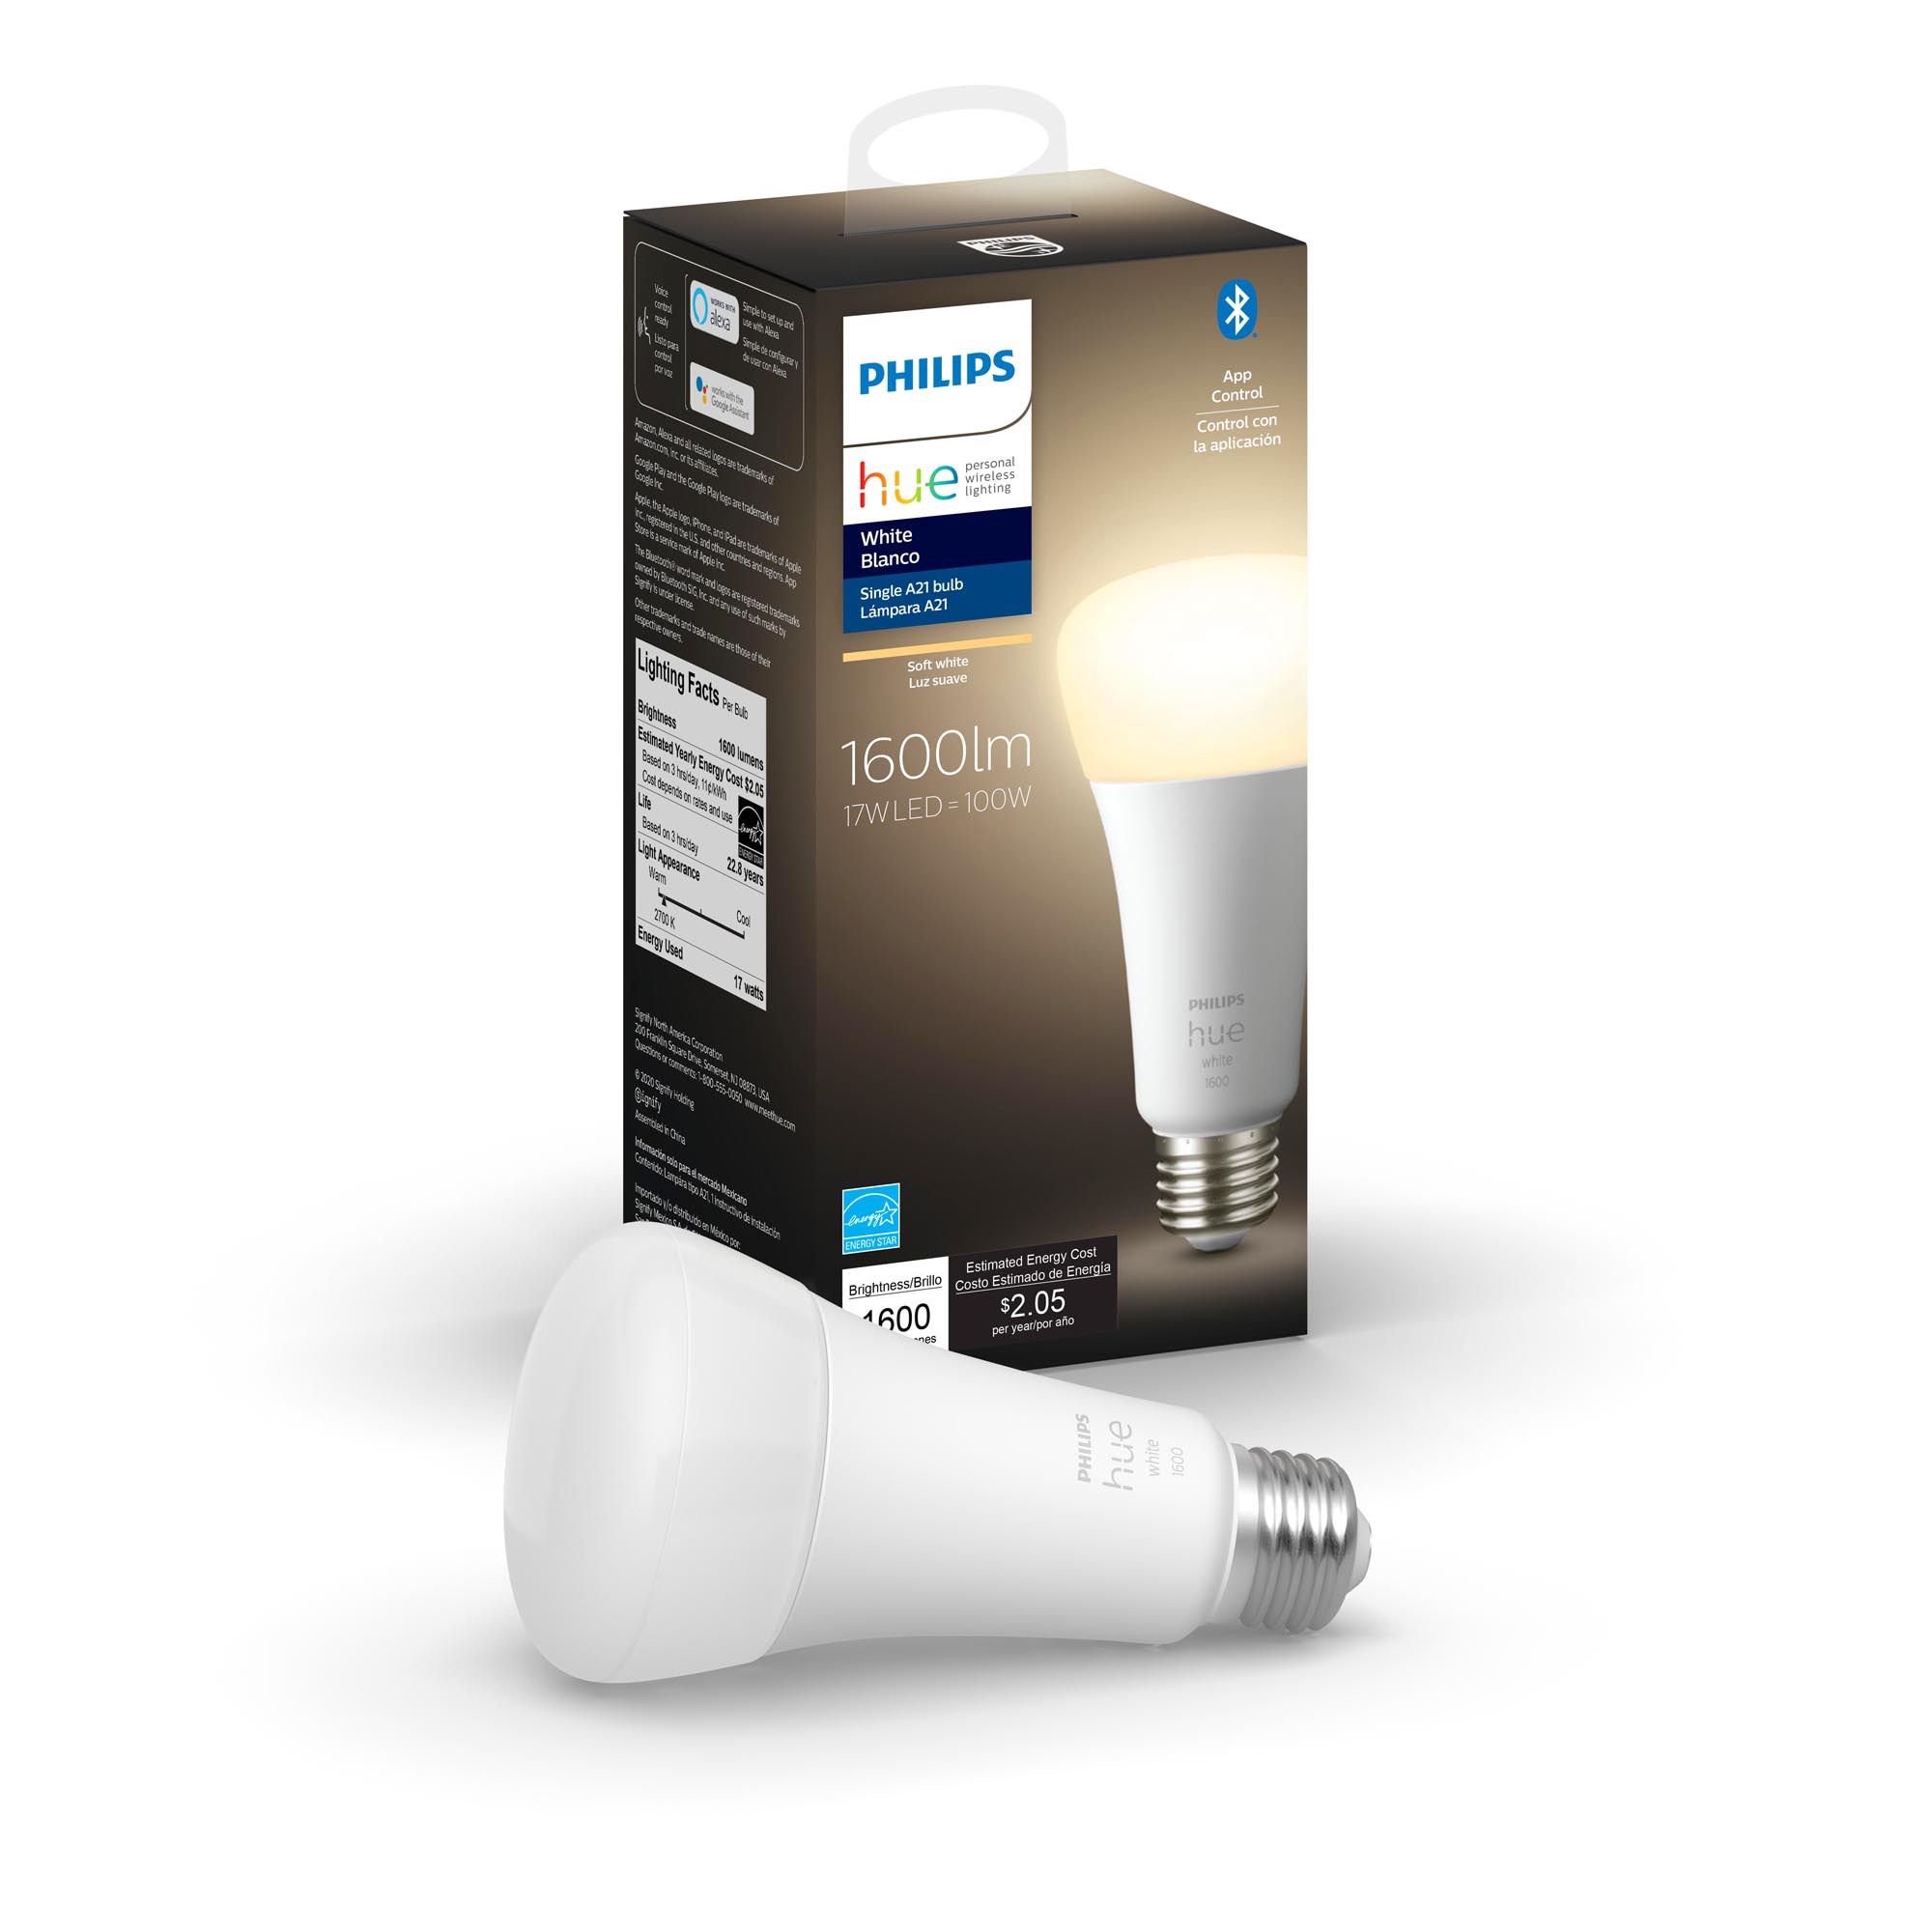 Geweldig Eenheid onderpand Signify introduces new Philips Hue products | Signify Company Website